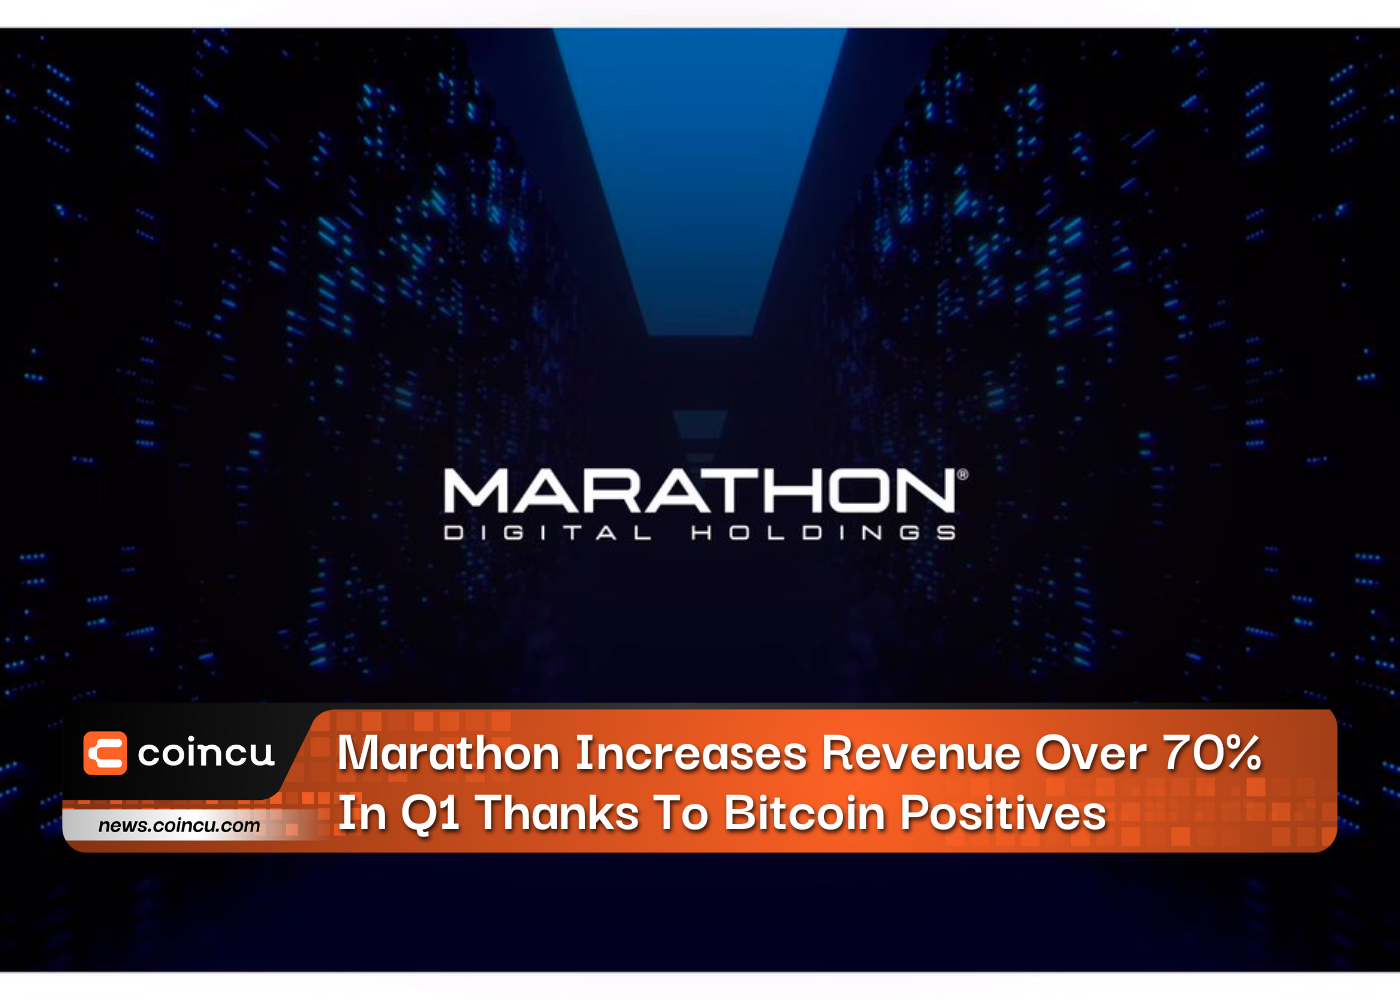 Marathon Increases Revenue Over 70% In Q1 Thanks To Bitcoin Positives